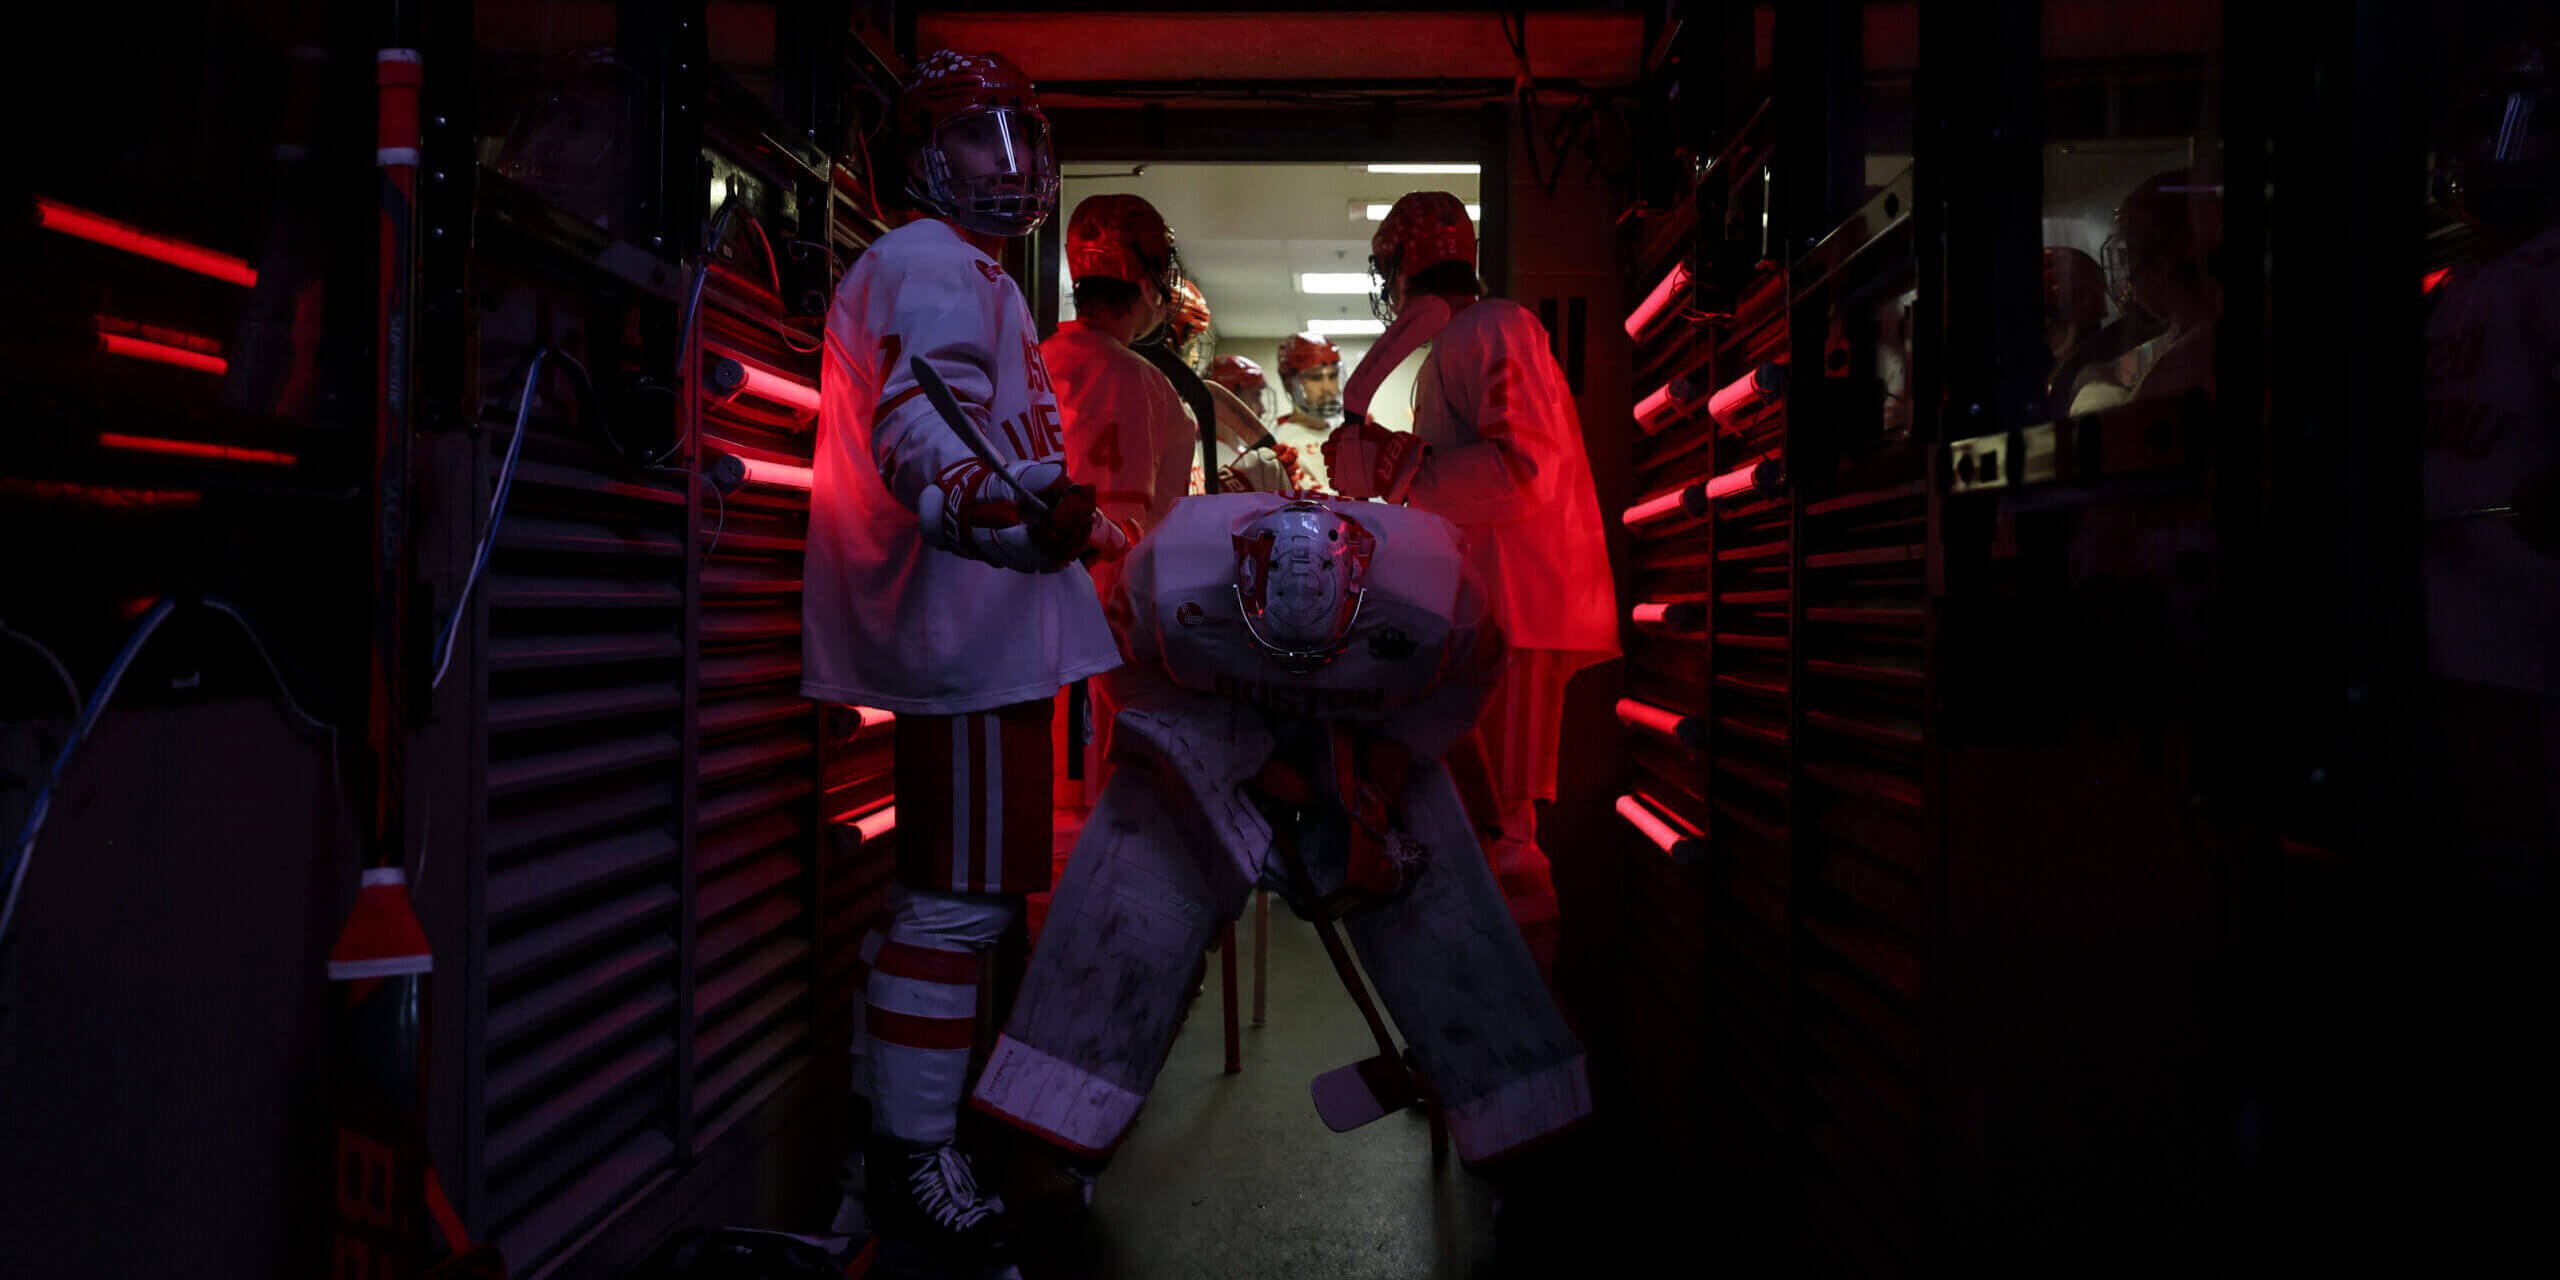  Inside Boston University’s Frozen Four week: Blue-chip stars, ‘dancing shoes’ and a program back to its roots 